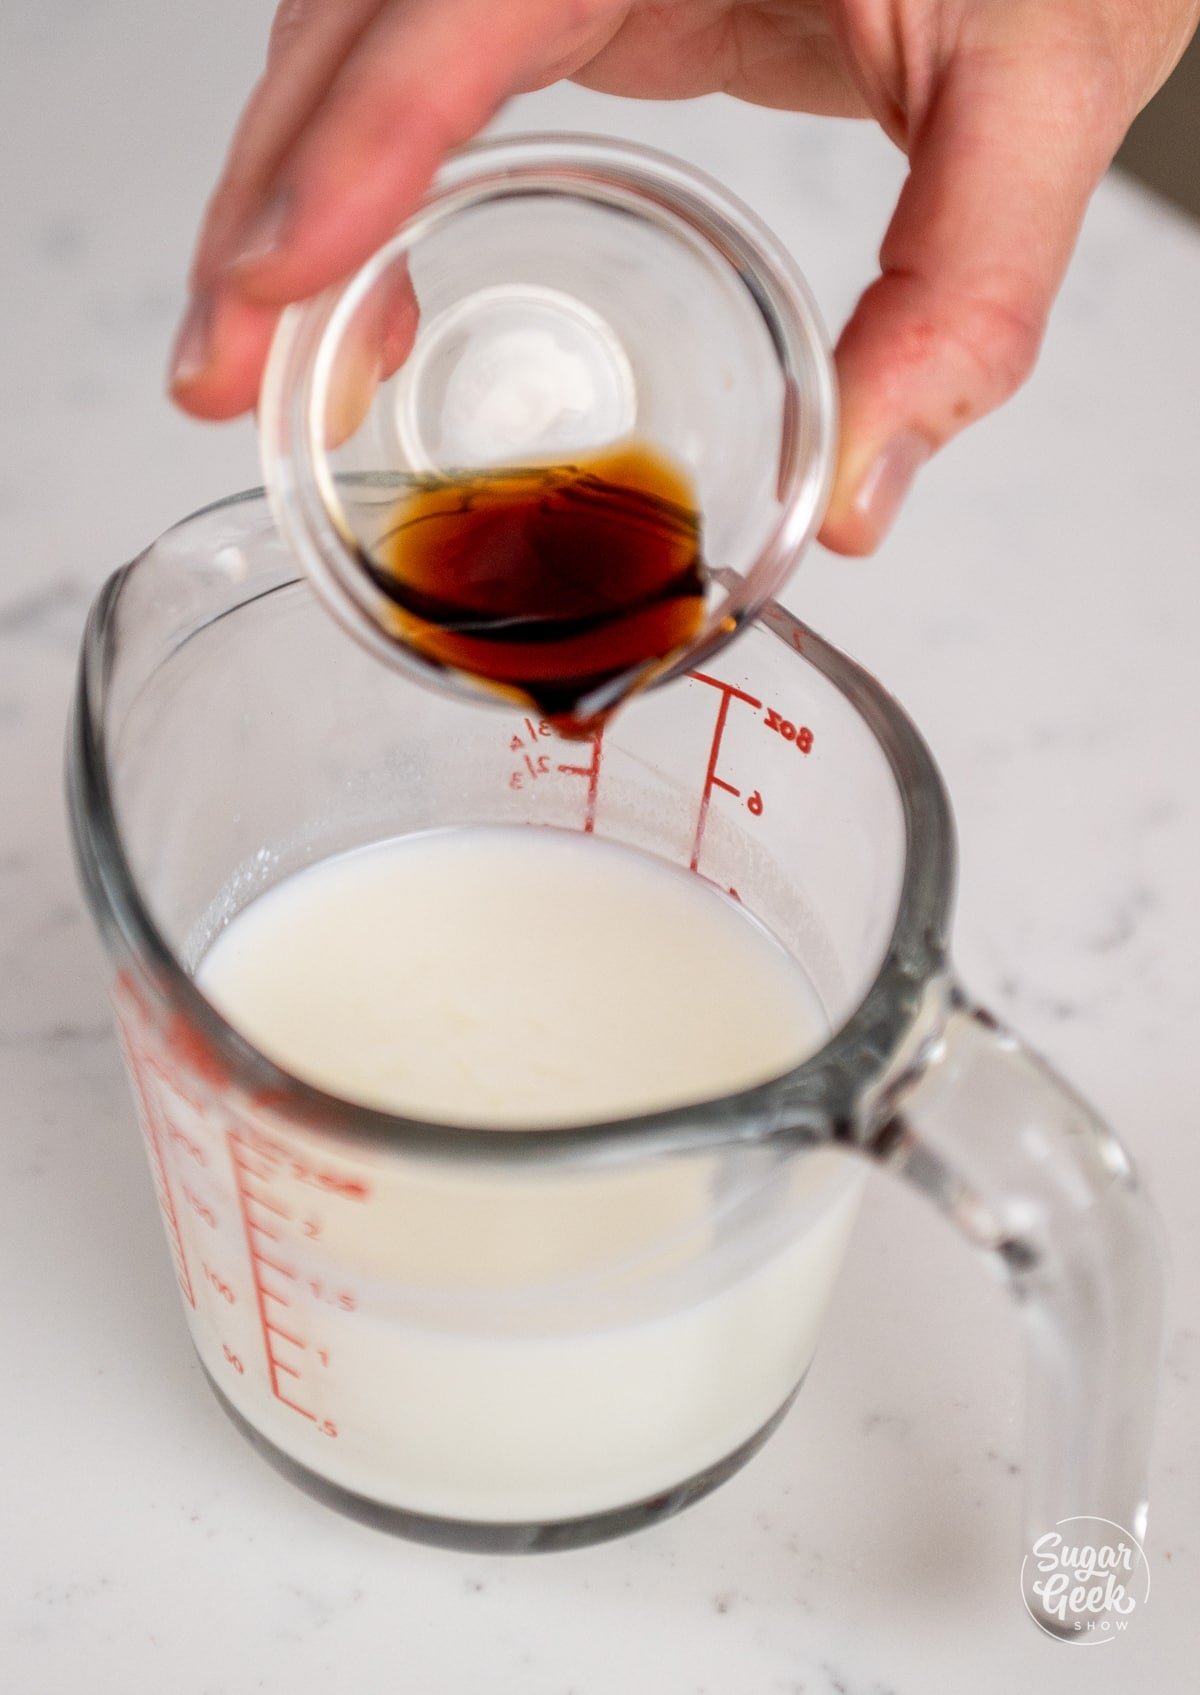 hand adding vanilla to buttermilk in a measuring cup.